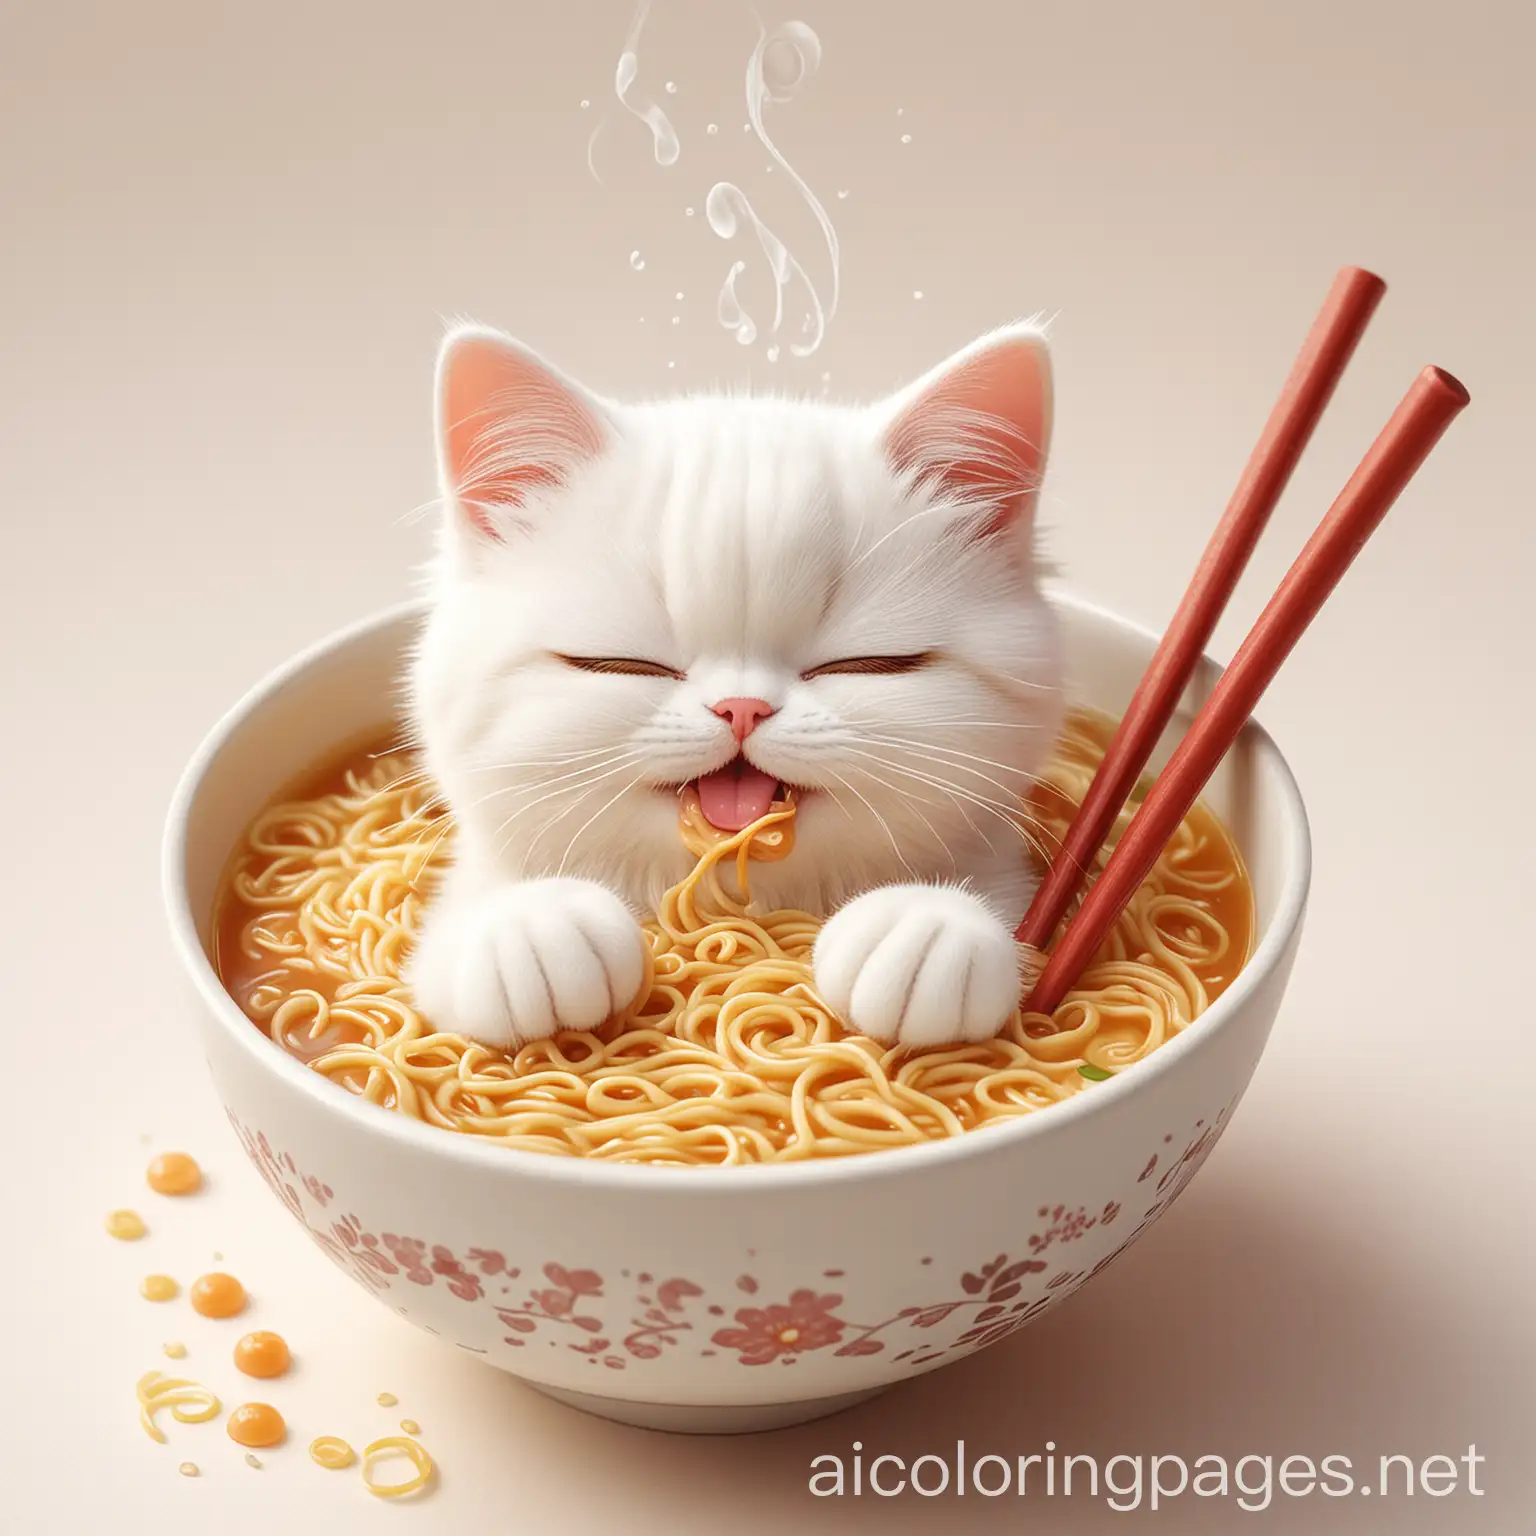 A charming illustration of an adorable, kawaii cat relishing a bowl of steaming ramen. The cat's eyes are closed in pure bliss as it delicately picks up the noodles with a pair of chopsticks. The scene is set against a clean, white background, with tiny bubbles rising from the simmering broth. The cat's soft fur radiates a warm, inviting light, adding to the cute and comforting ambiance. The illustration beautifully captures the essence of simple pleasure and happiness, making it the epitome of contentment., Coloring Page, black and white, line art, white background, Simplicity, Ample White Space. The background of the coloring page is plain white to make it easy for young children to color within the lines. The outlines of all the subjects are easy to distinguish, making it simple for kids to color without too much difficulty